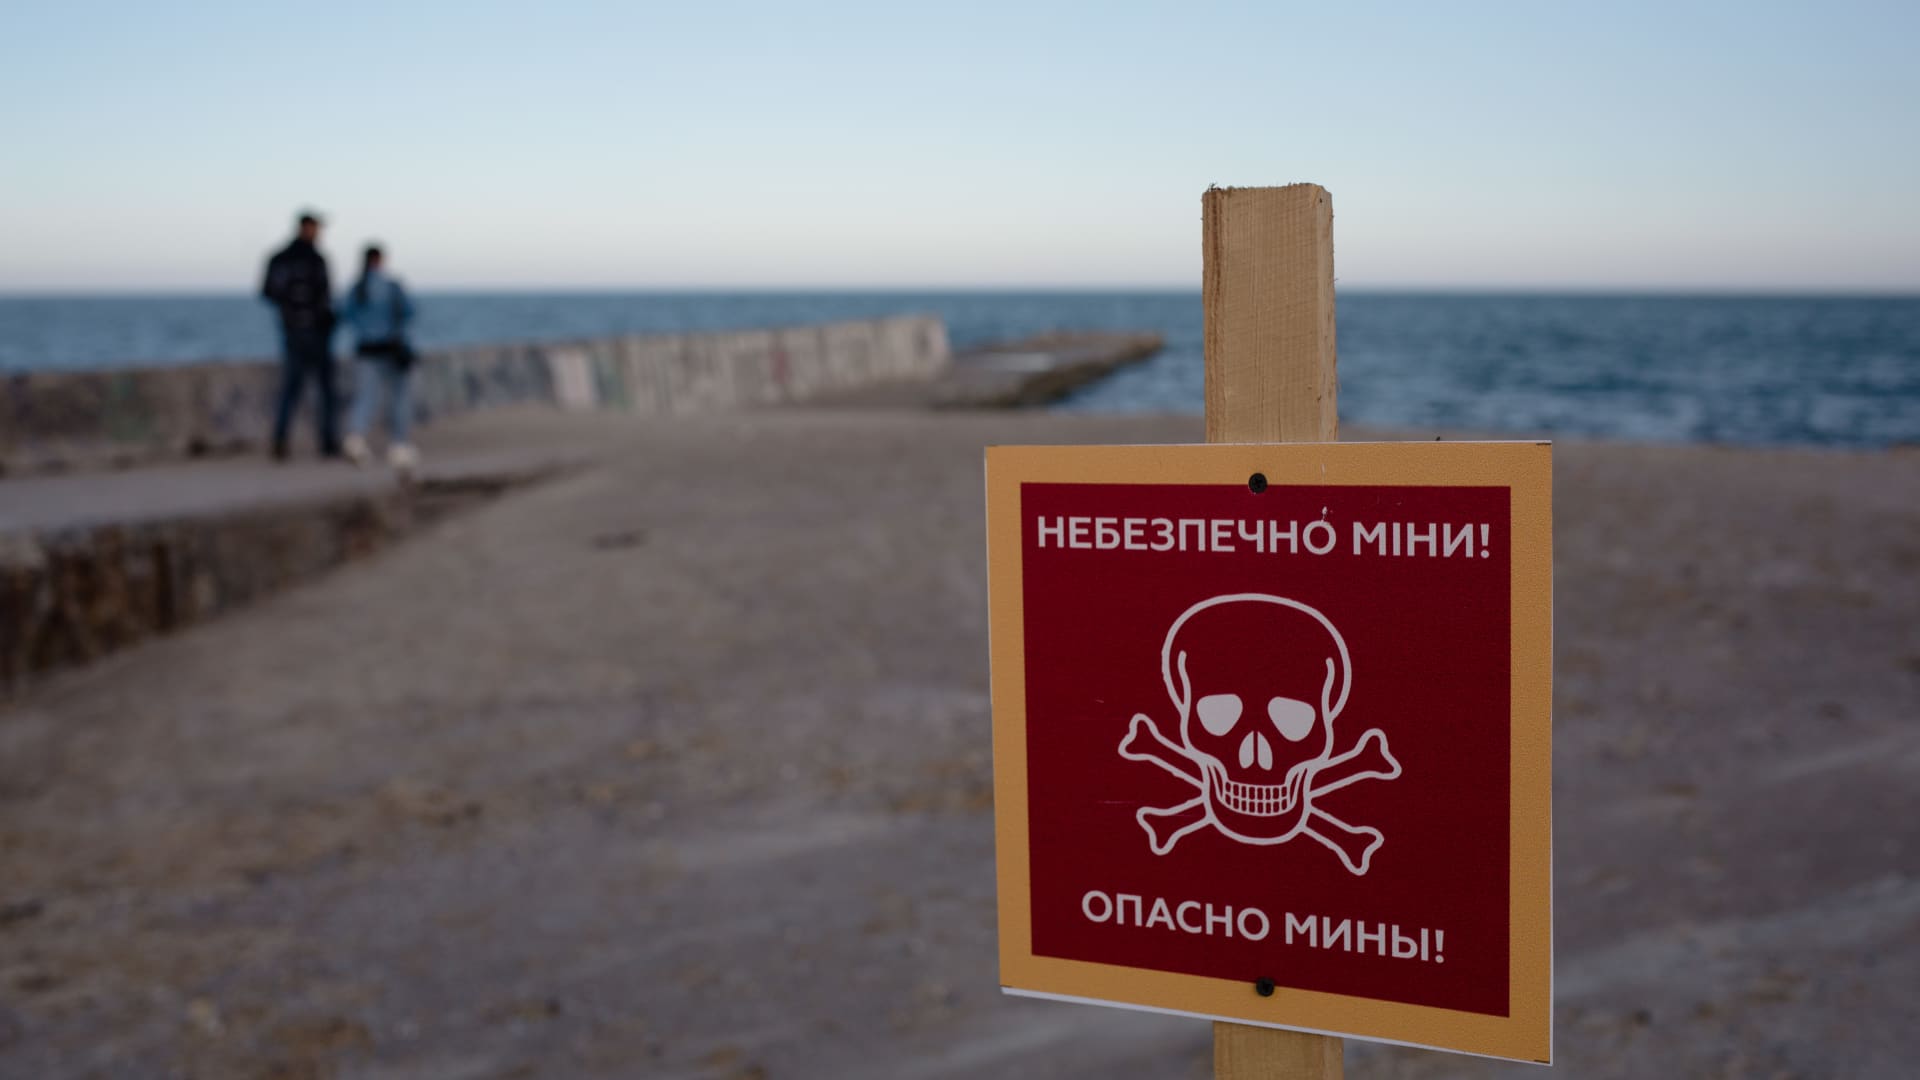 Russia and Ukraine fight over underwater mines within the Black Sea